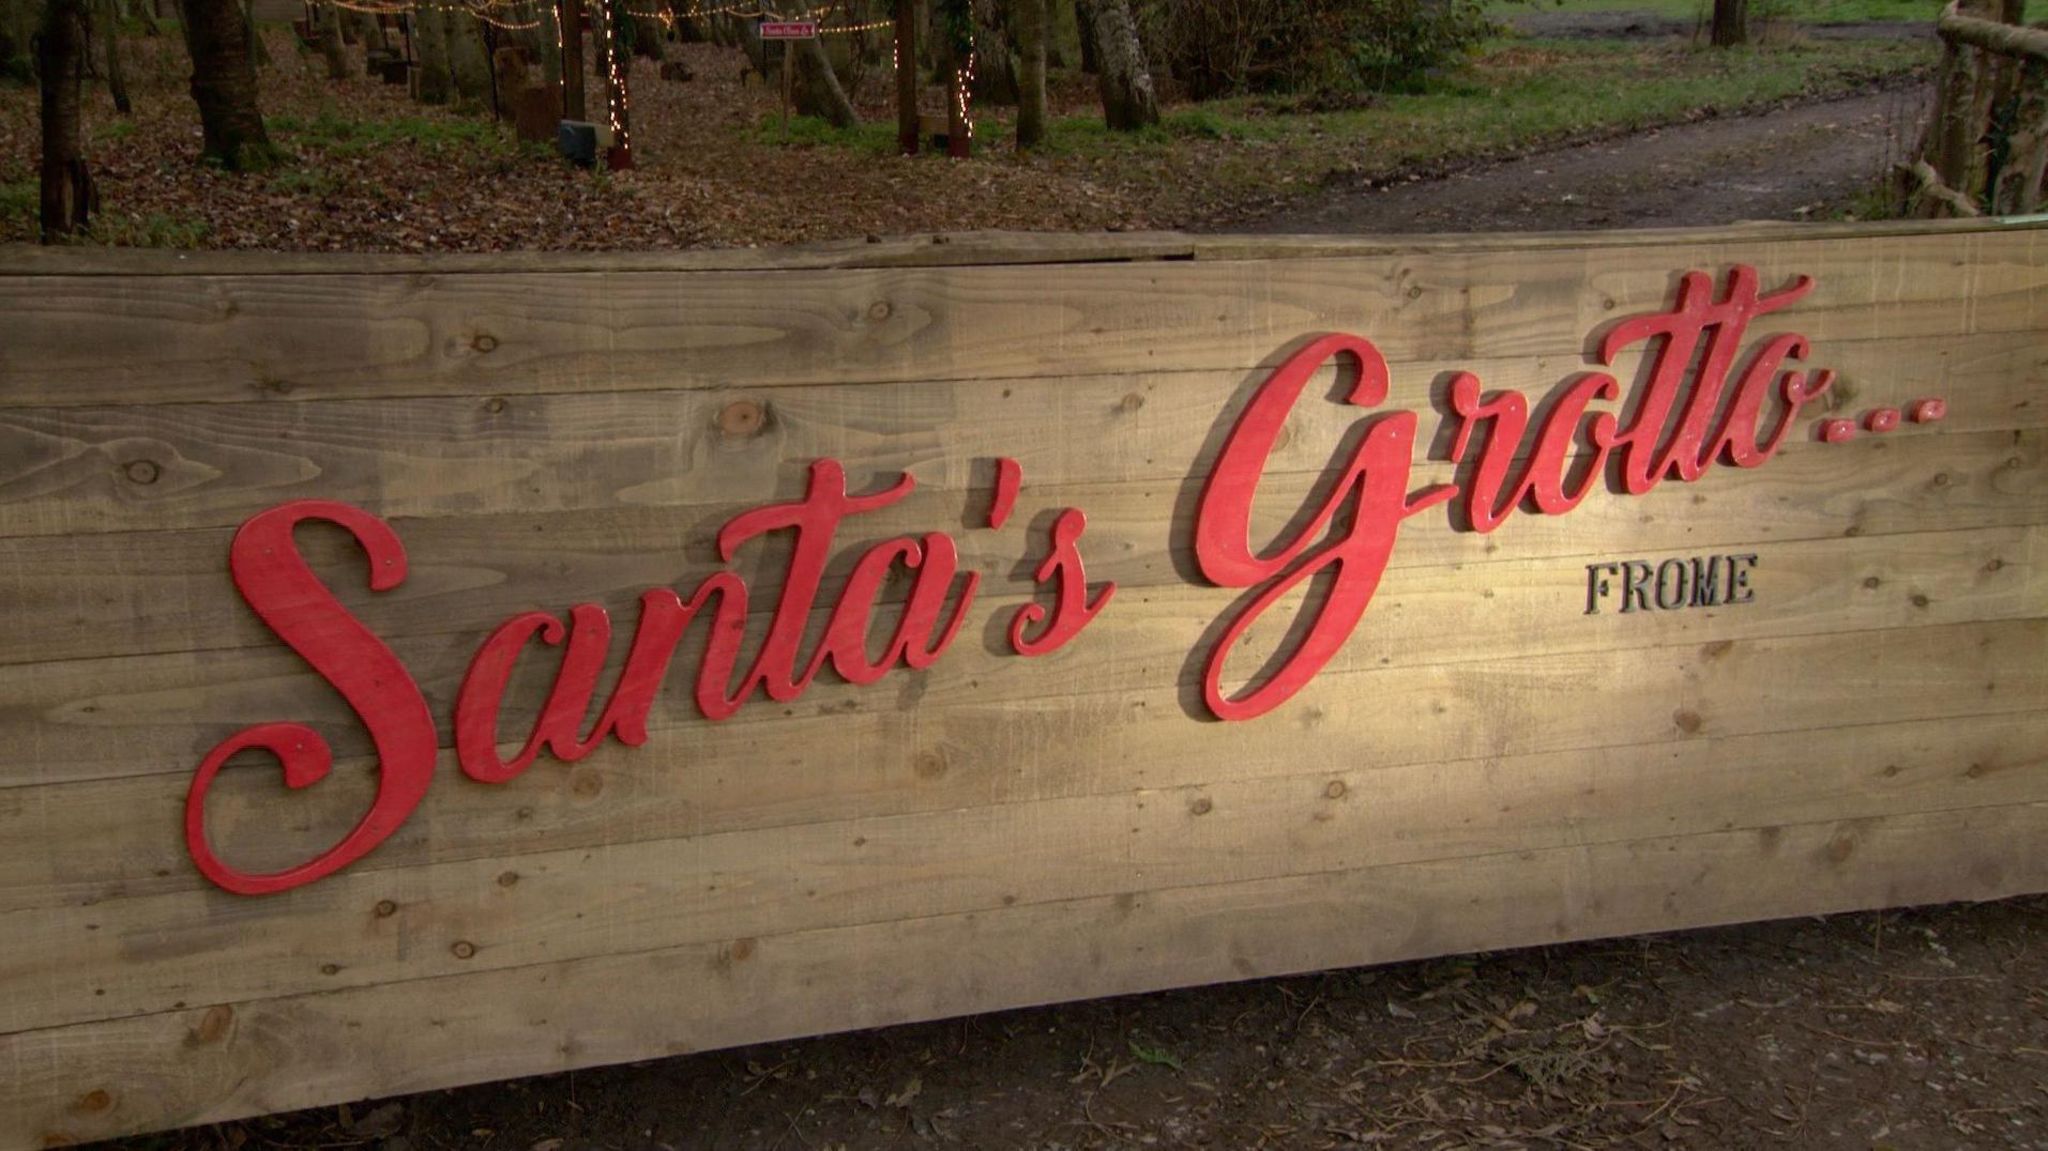 Santa's Grotto in red lettering on wood background